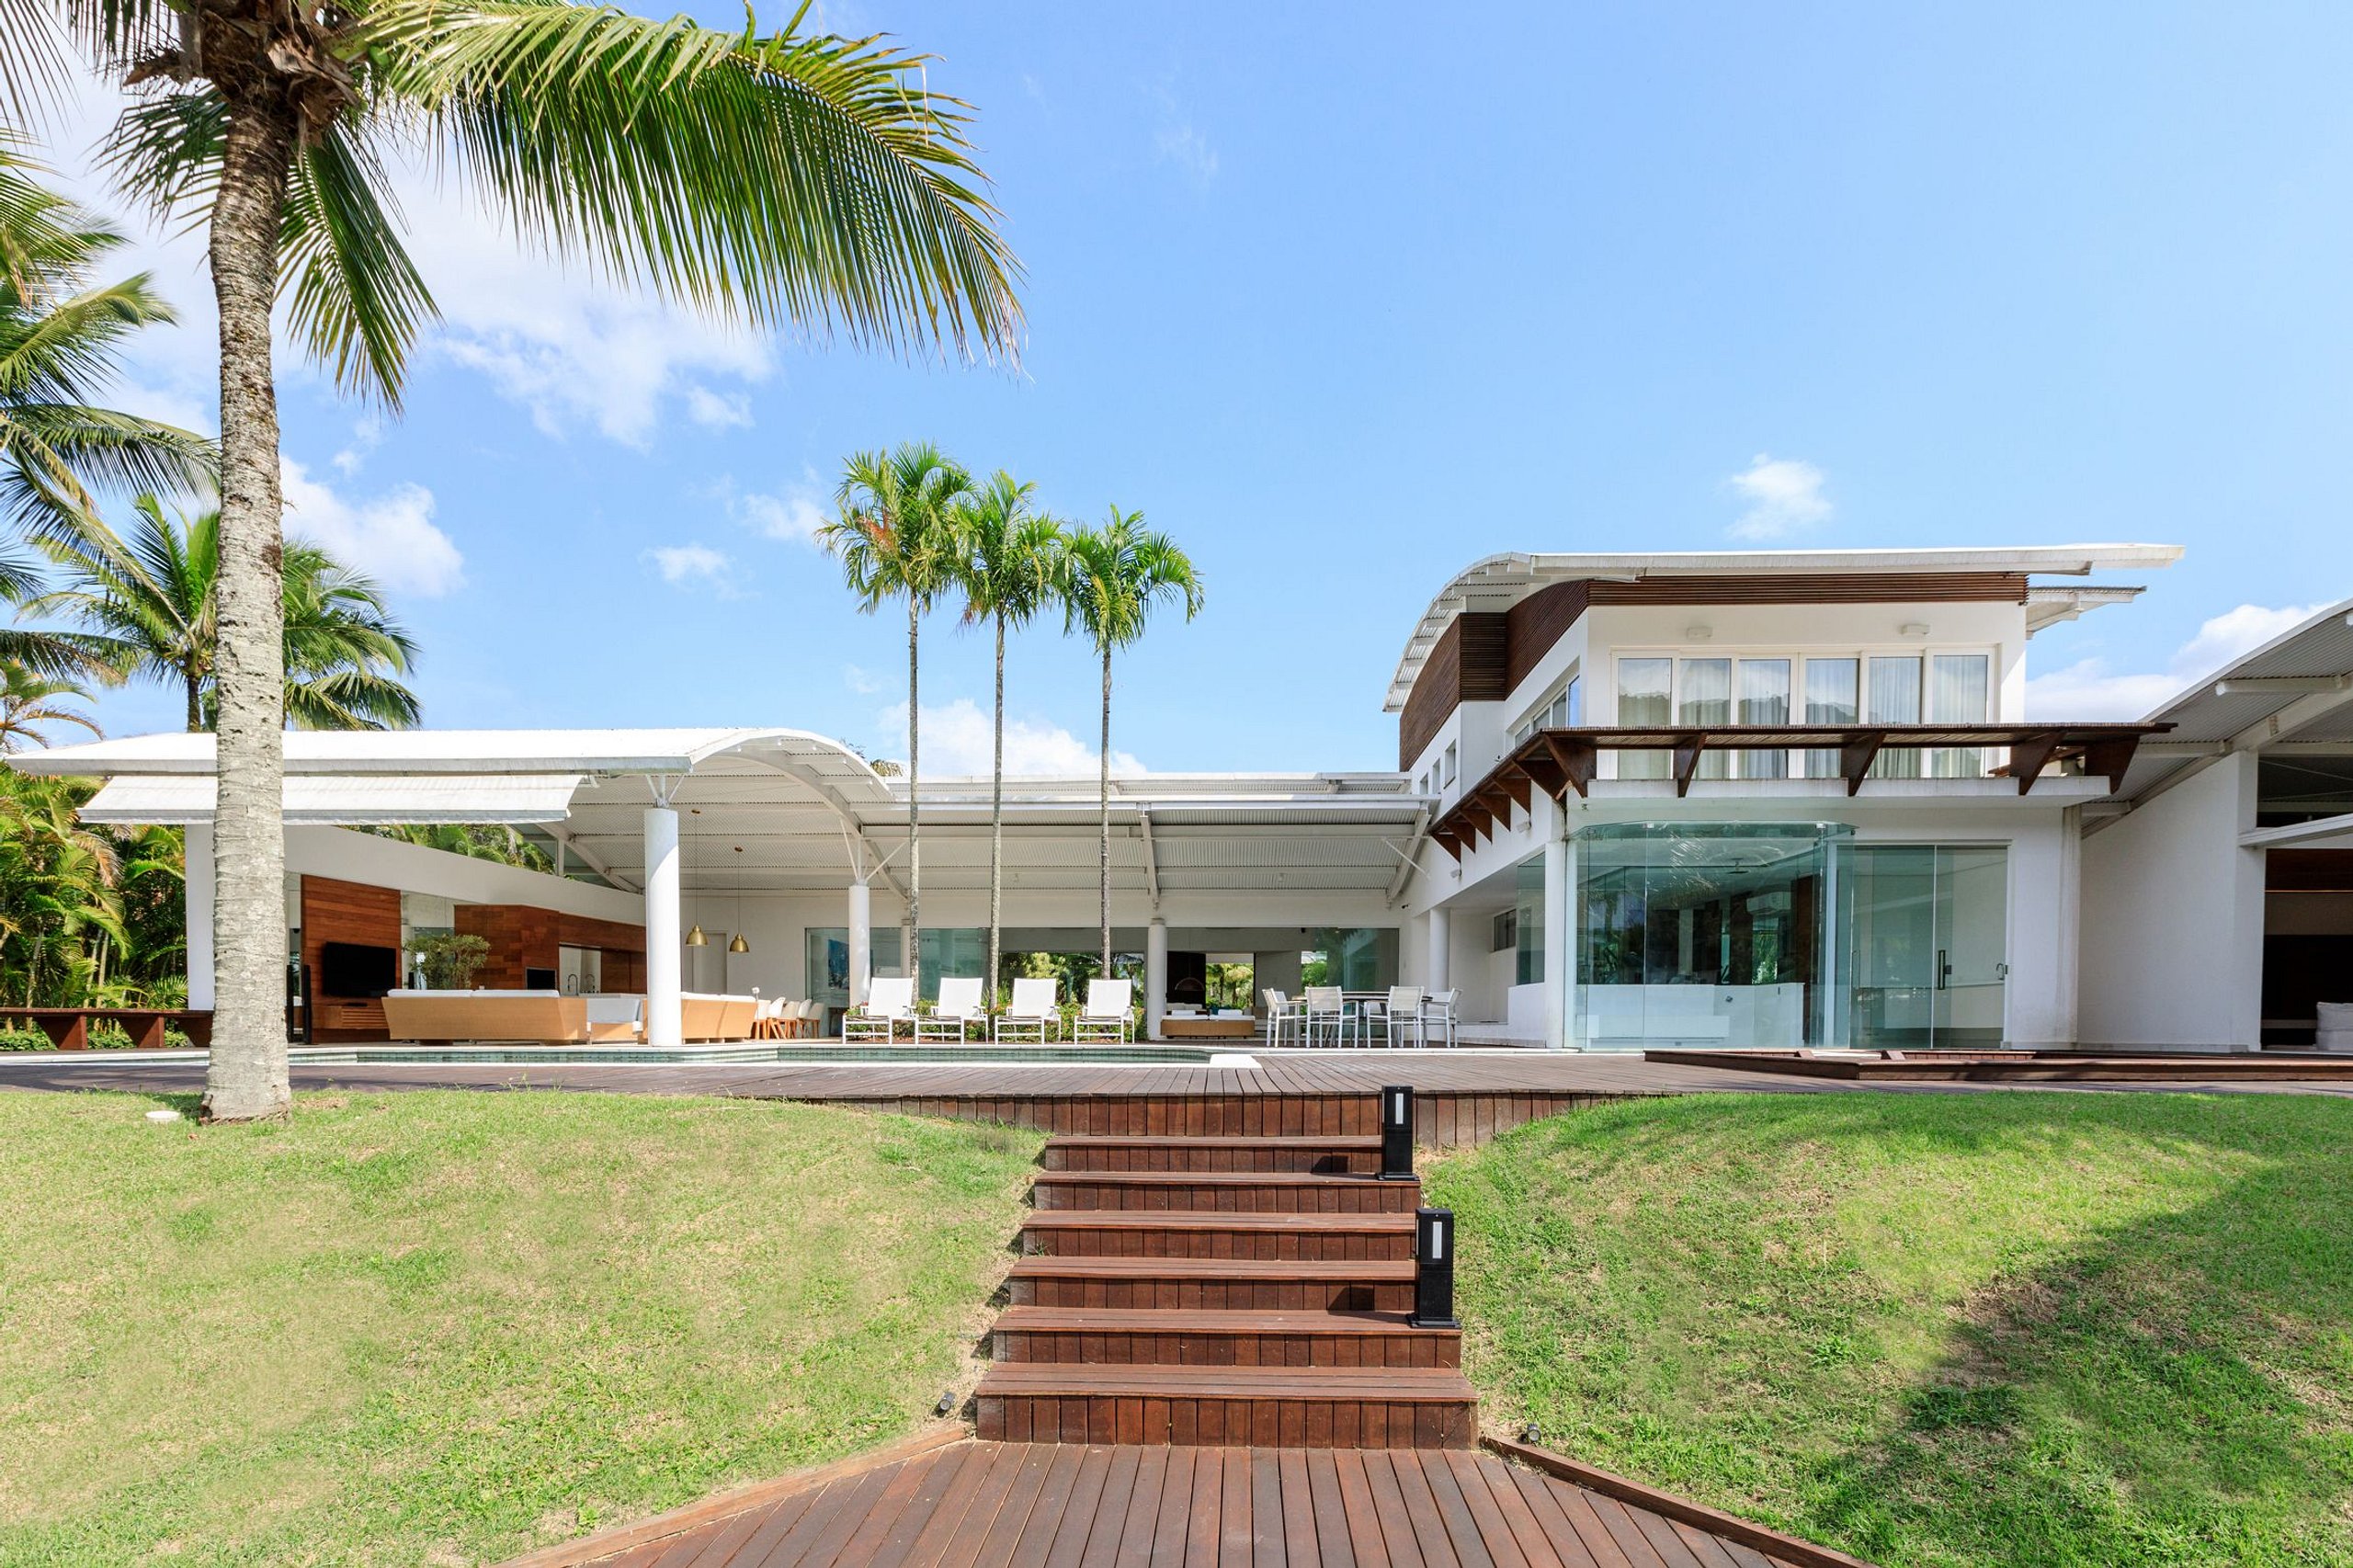 Property Image 2 - Ultimate Waterfront Glass Home Full of Natural Light